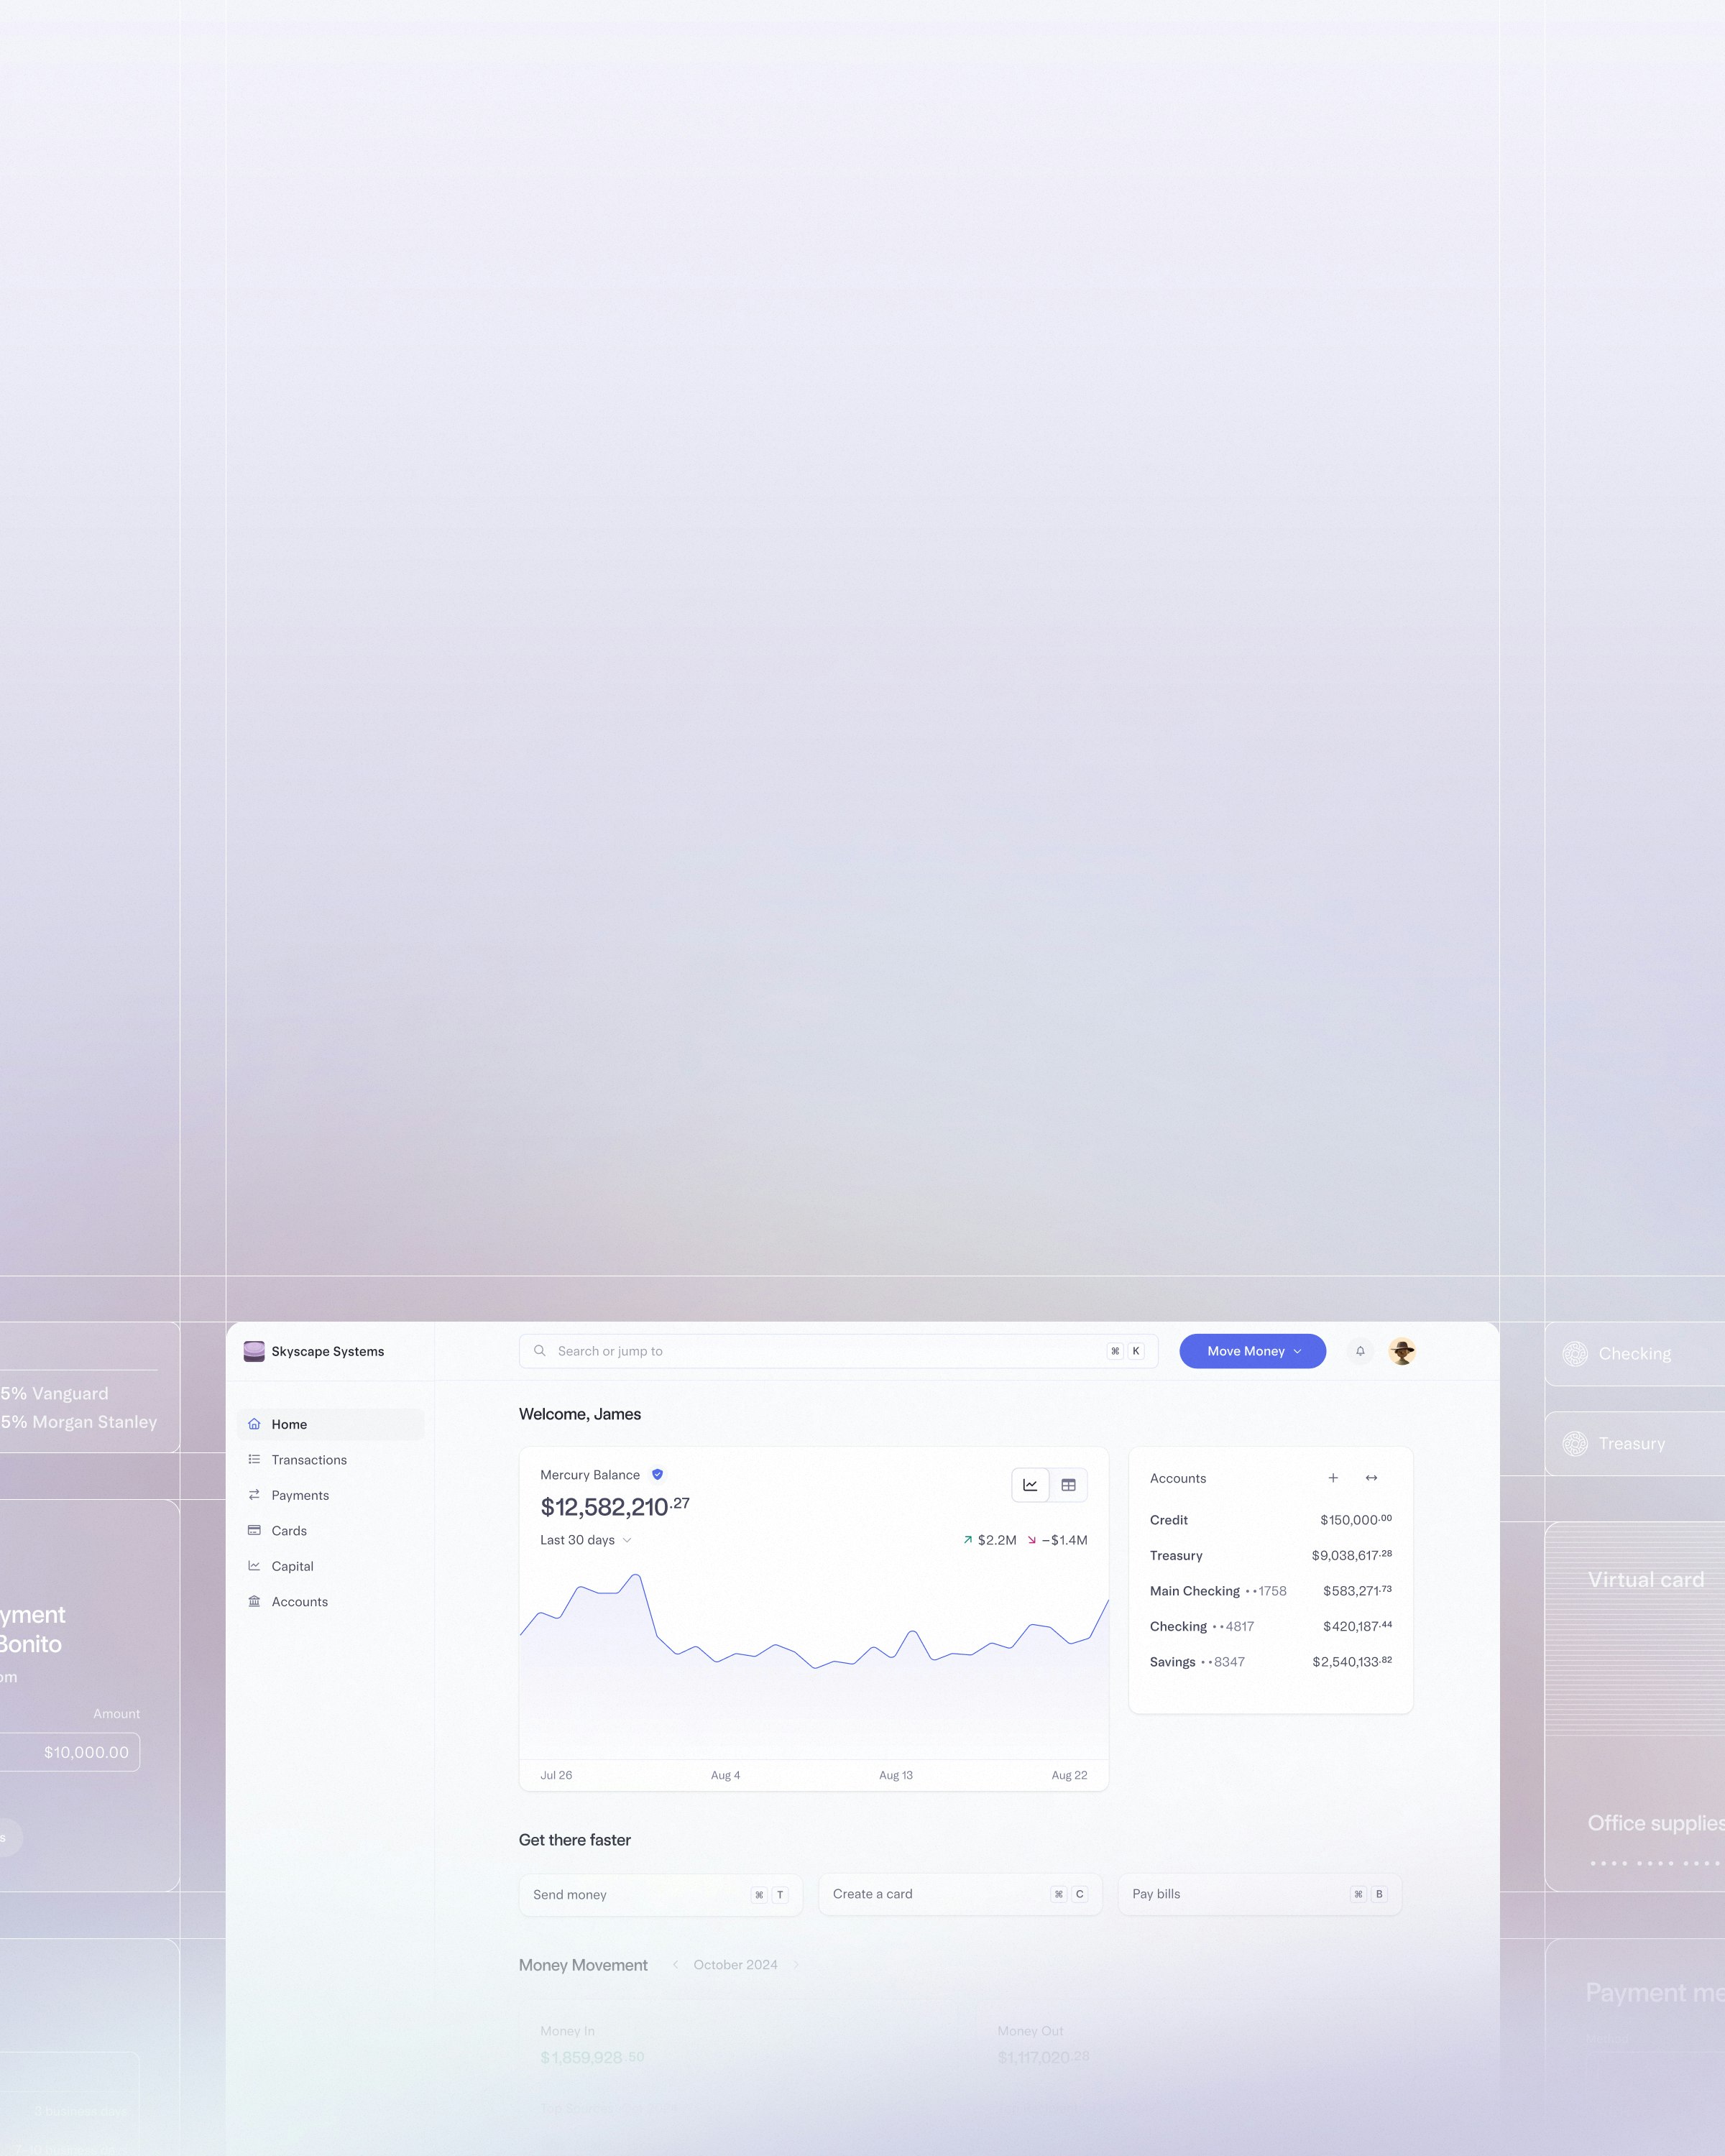 Transparent UI and gridlines surrounding financial dashboard interface